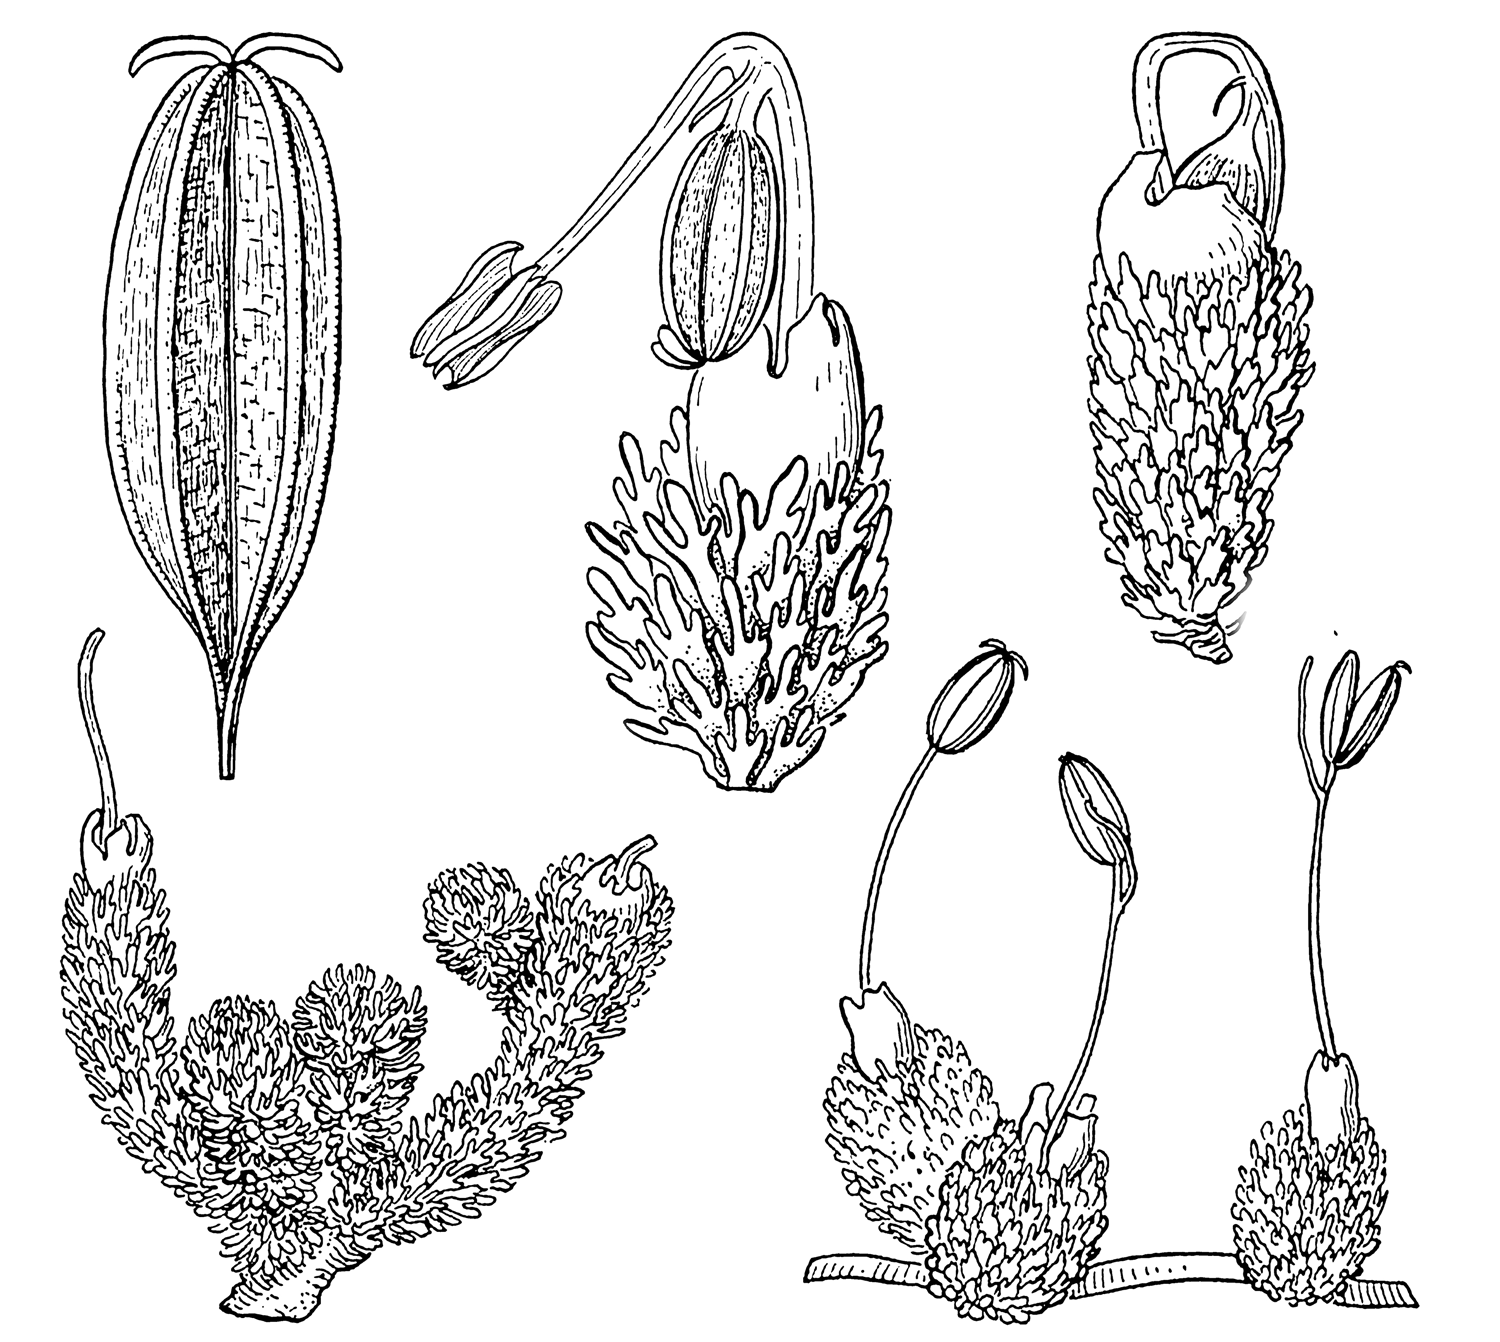 Drawing showing five different parts of the plant